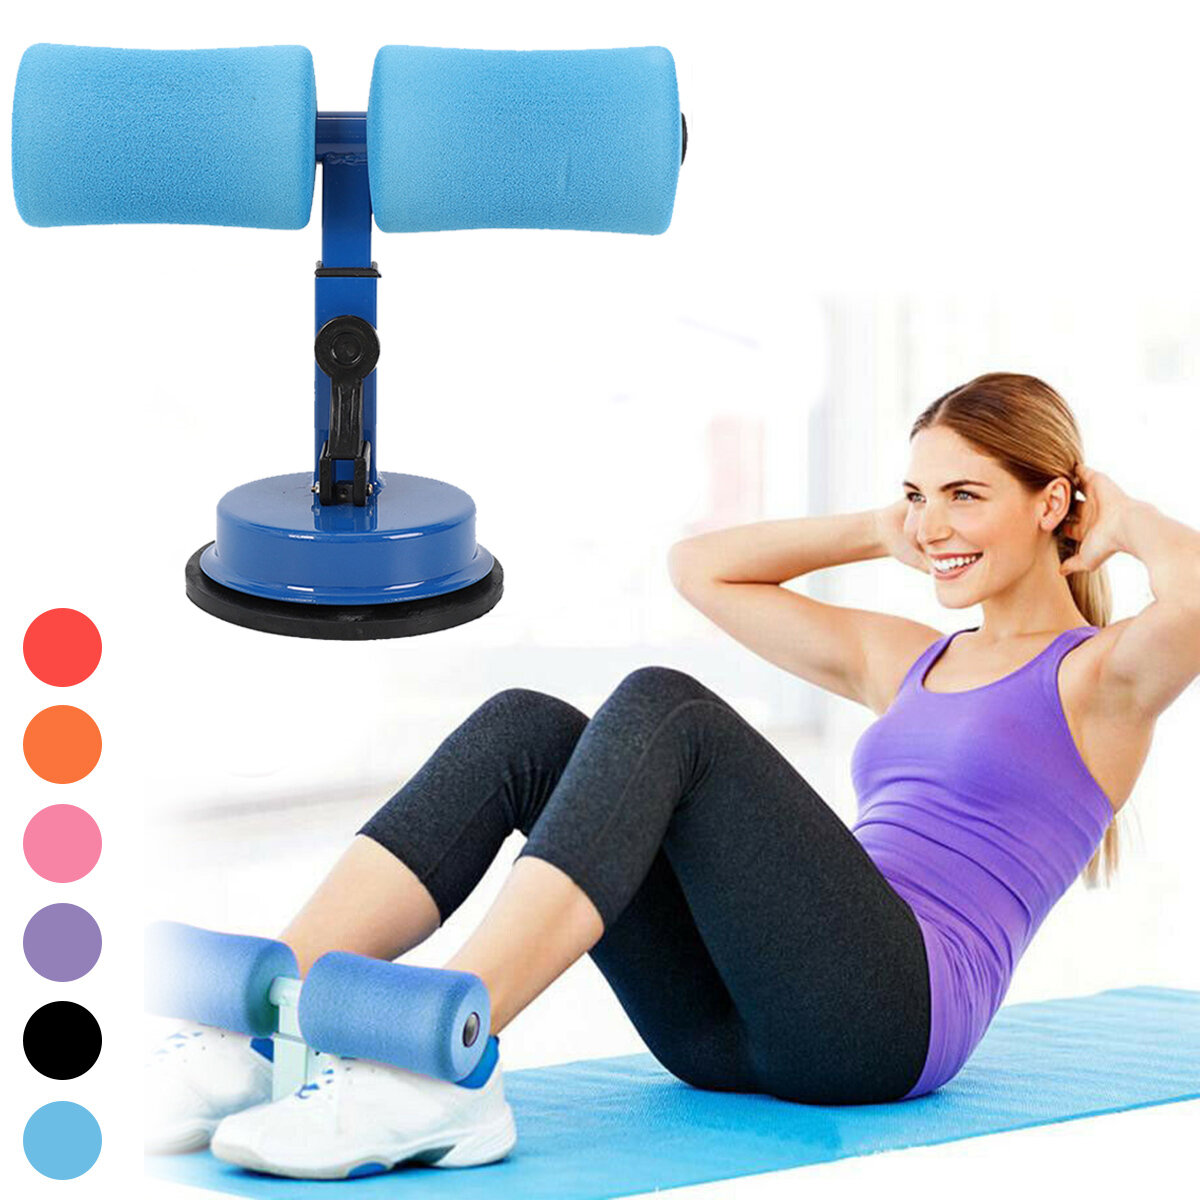 Abdomen Workout Sit-ups Assistant Device Waist Slimming Fitness Muscle Exercise Tools